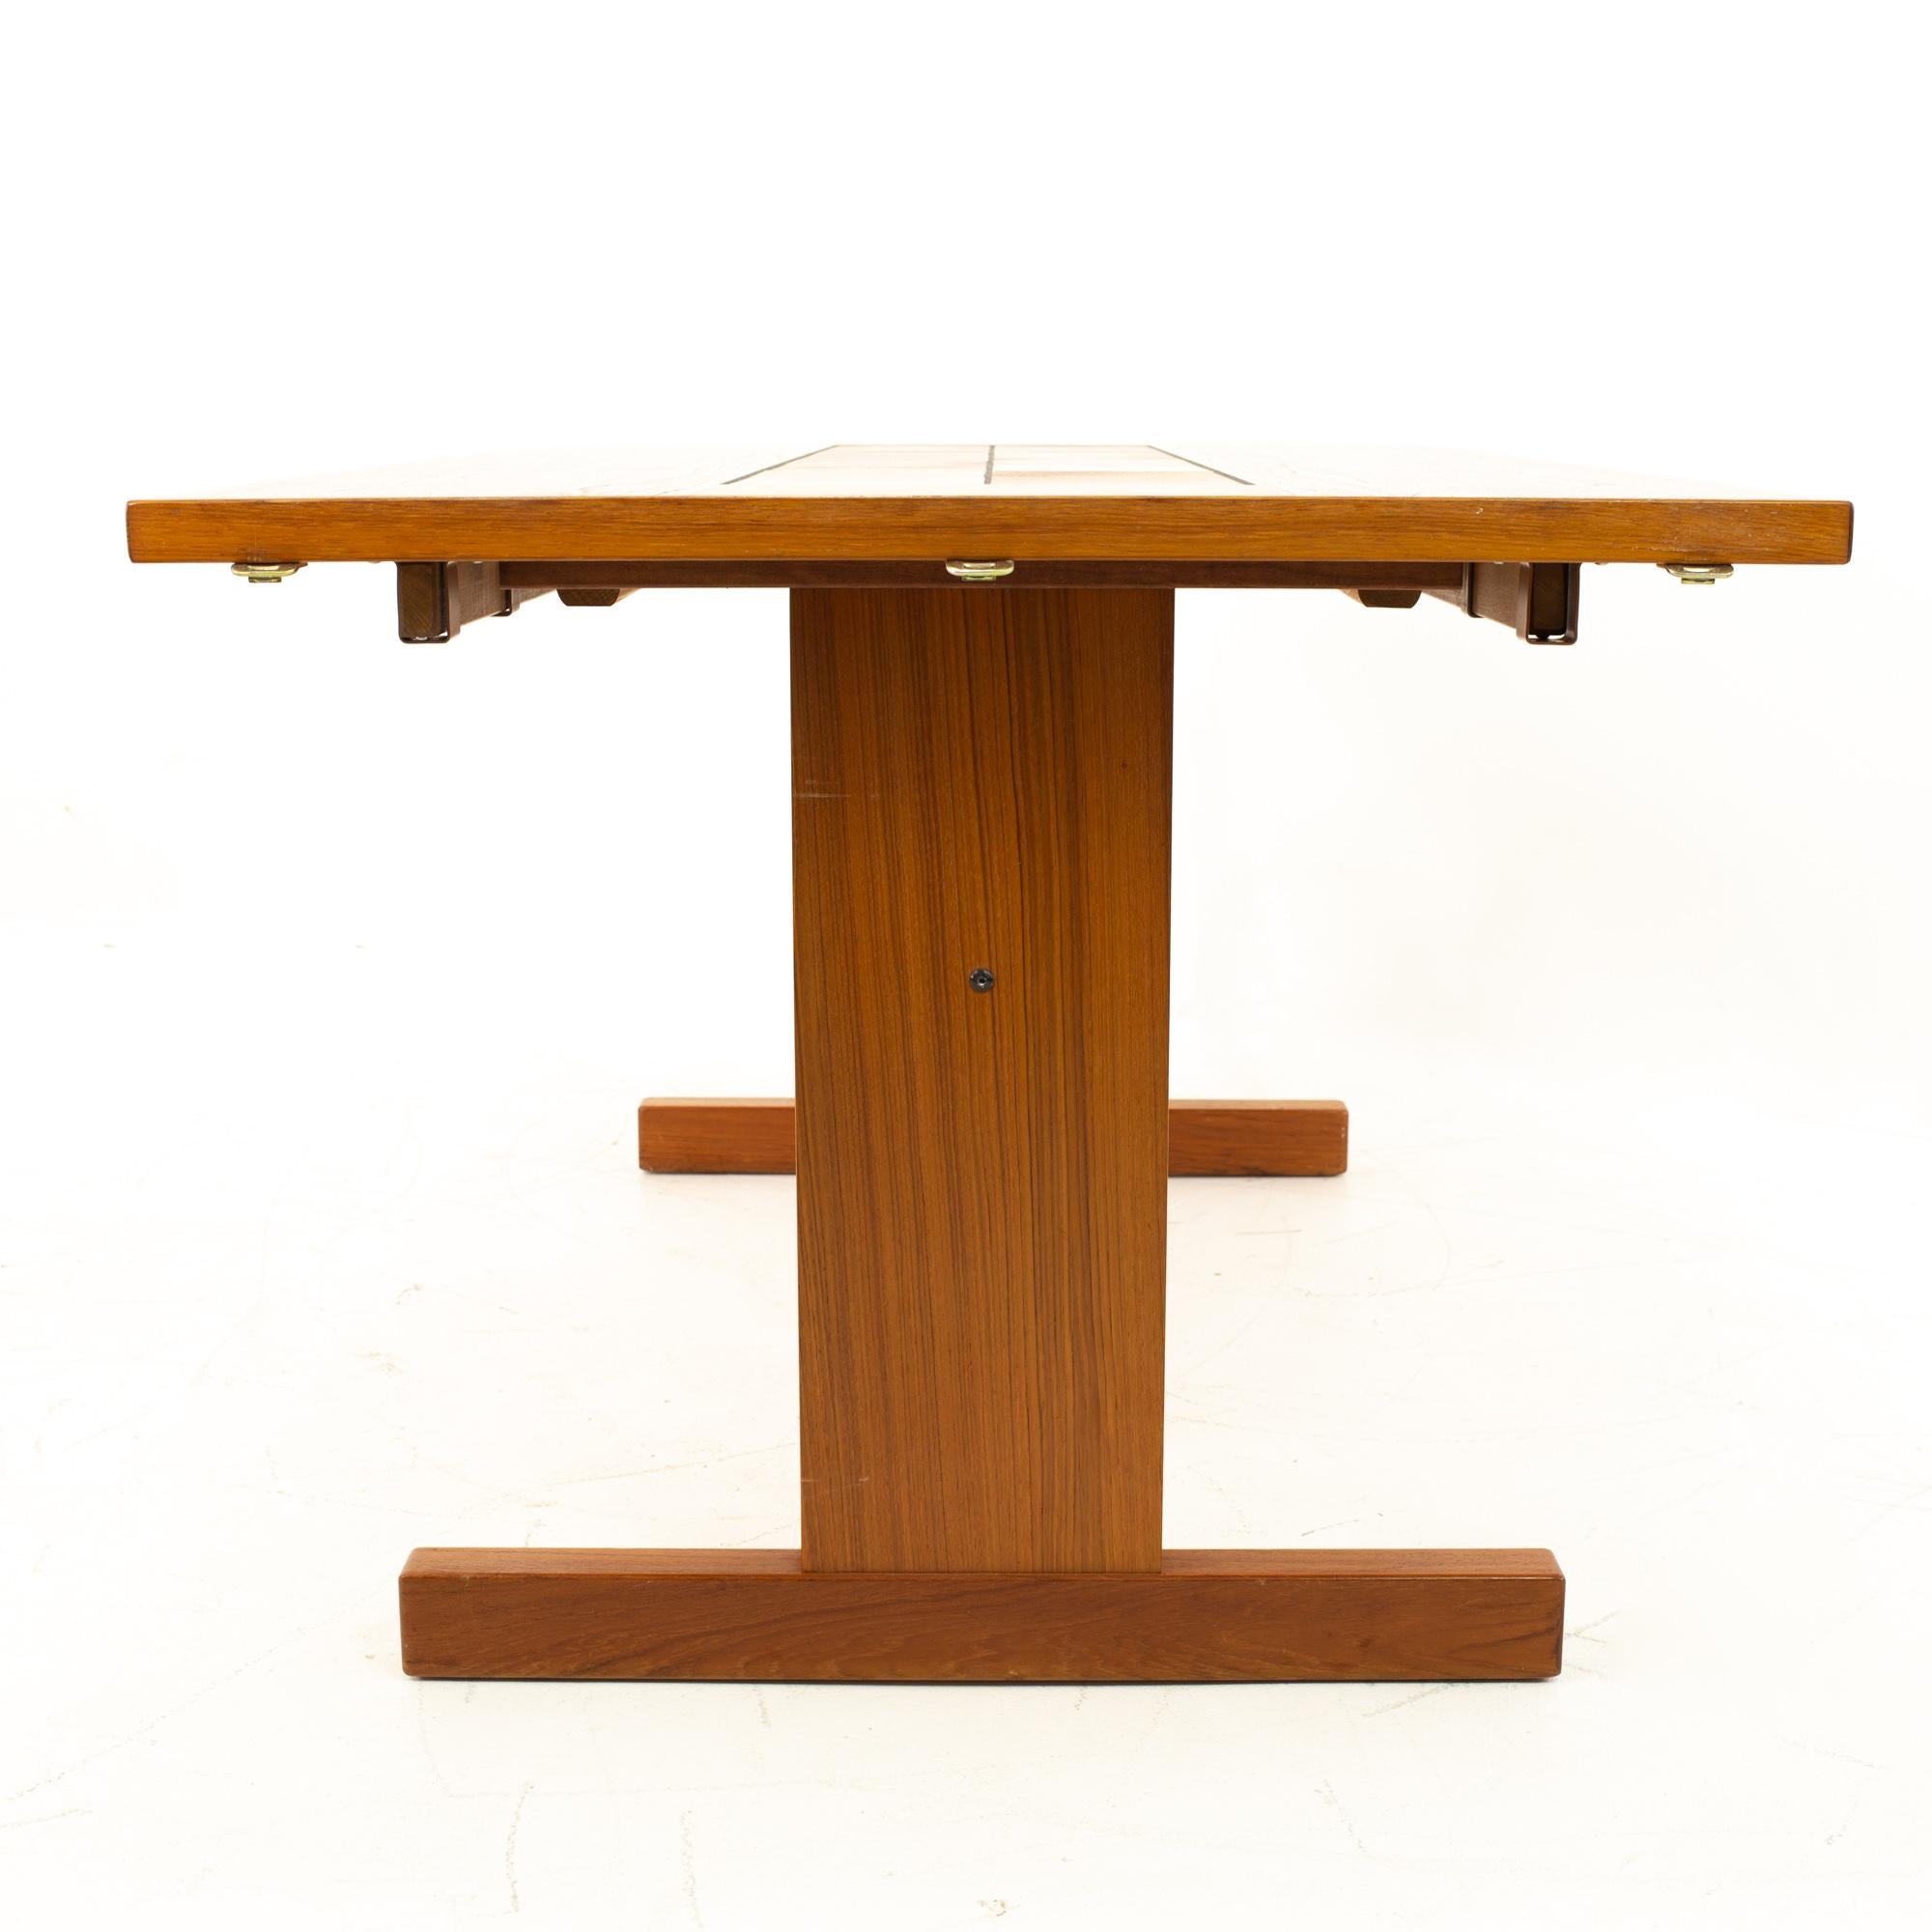 American Mid-Century Modern Teak Dining Table with Tile Inlay For Sale